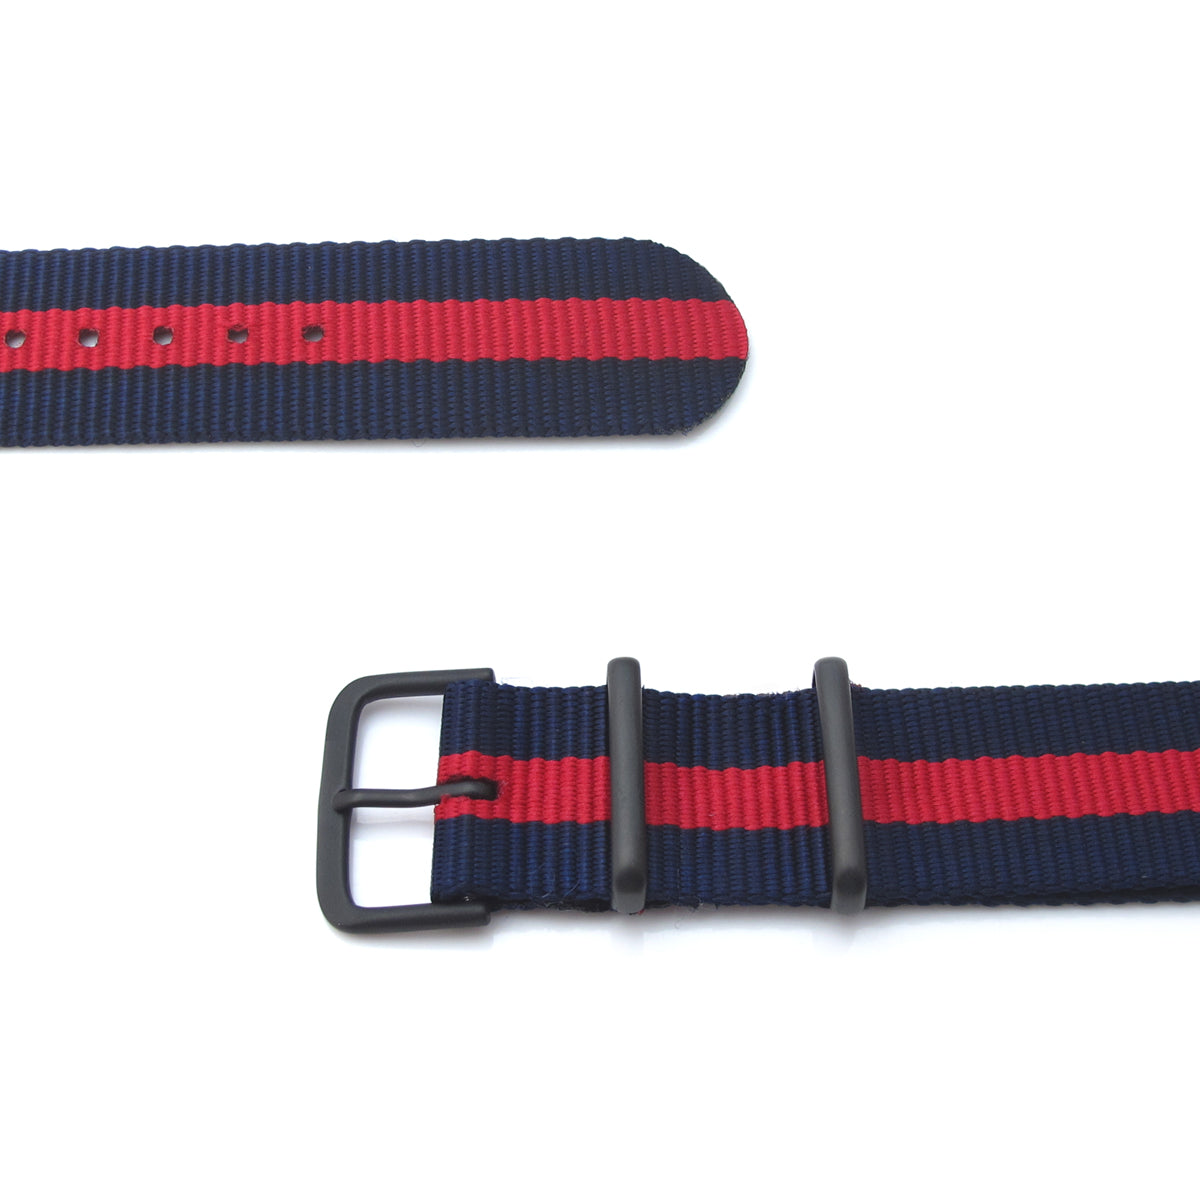 MiLTAT 20mm G10 military watch strap ballistic nylon armband PVD Red & Blue Stripes Strapcode Watch Bands